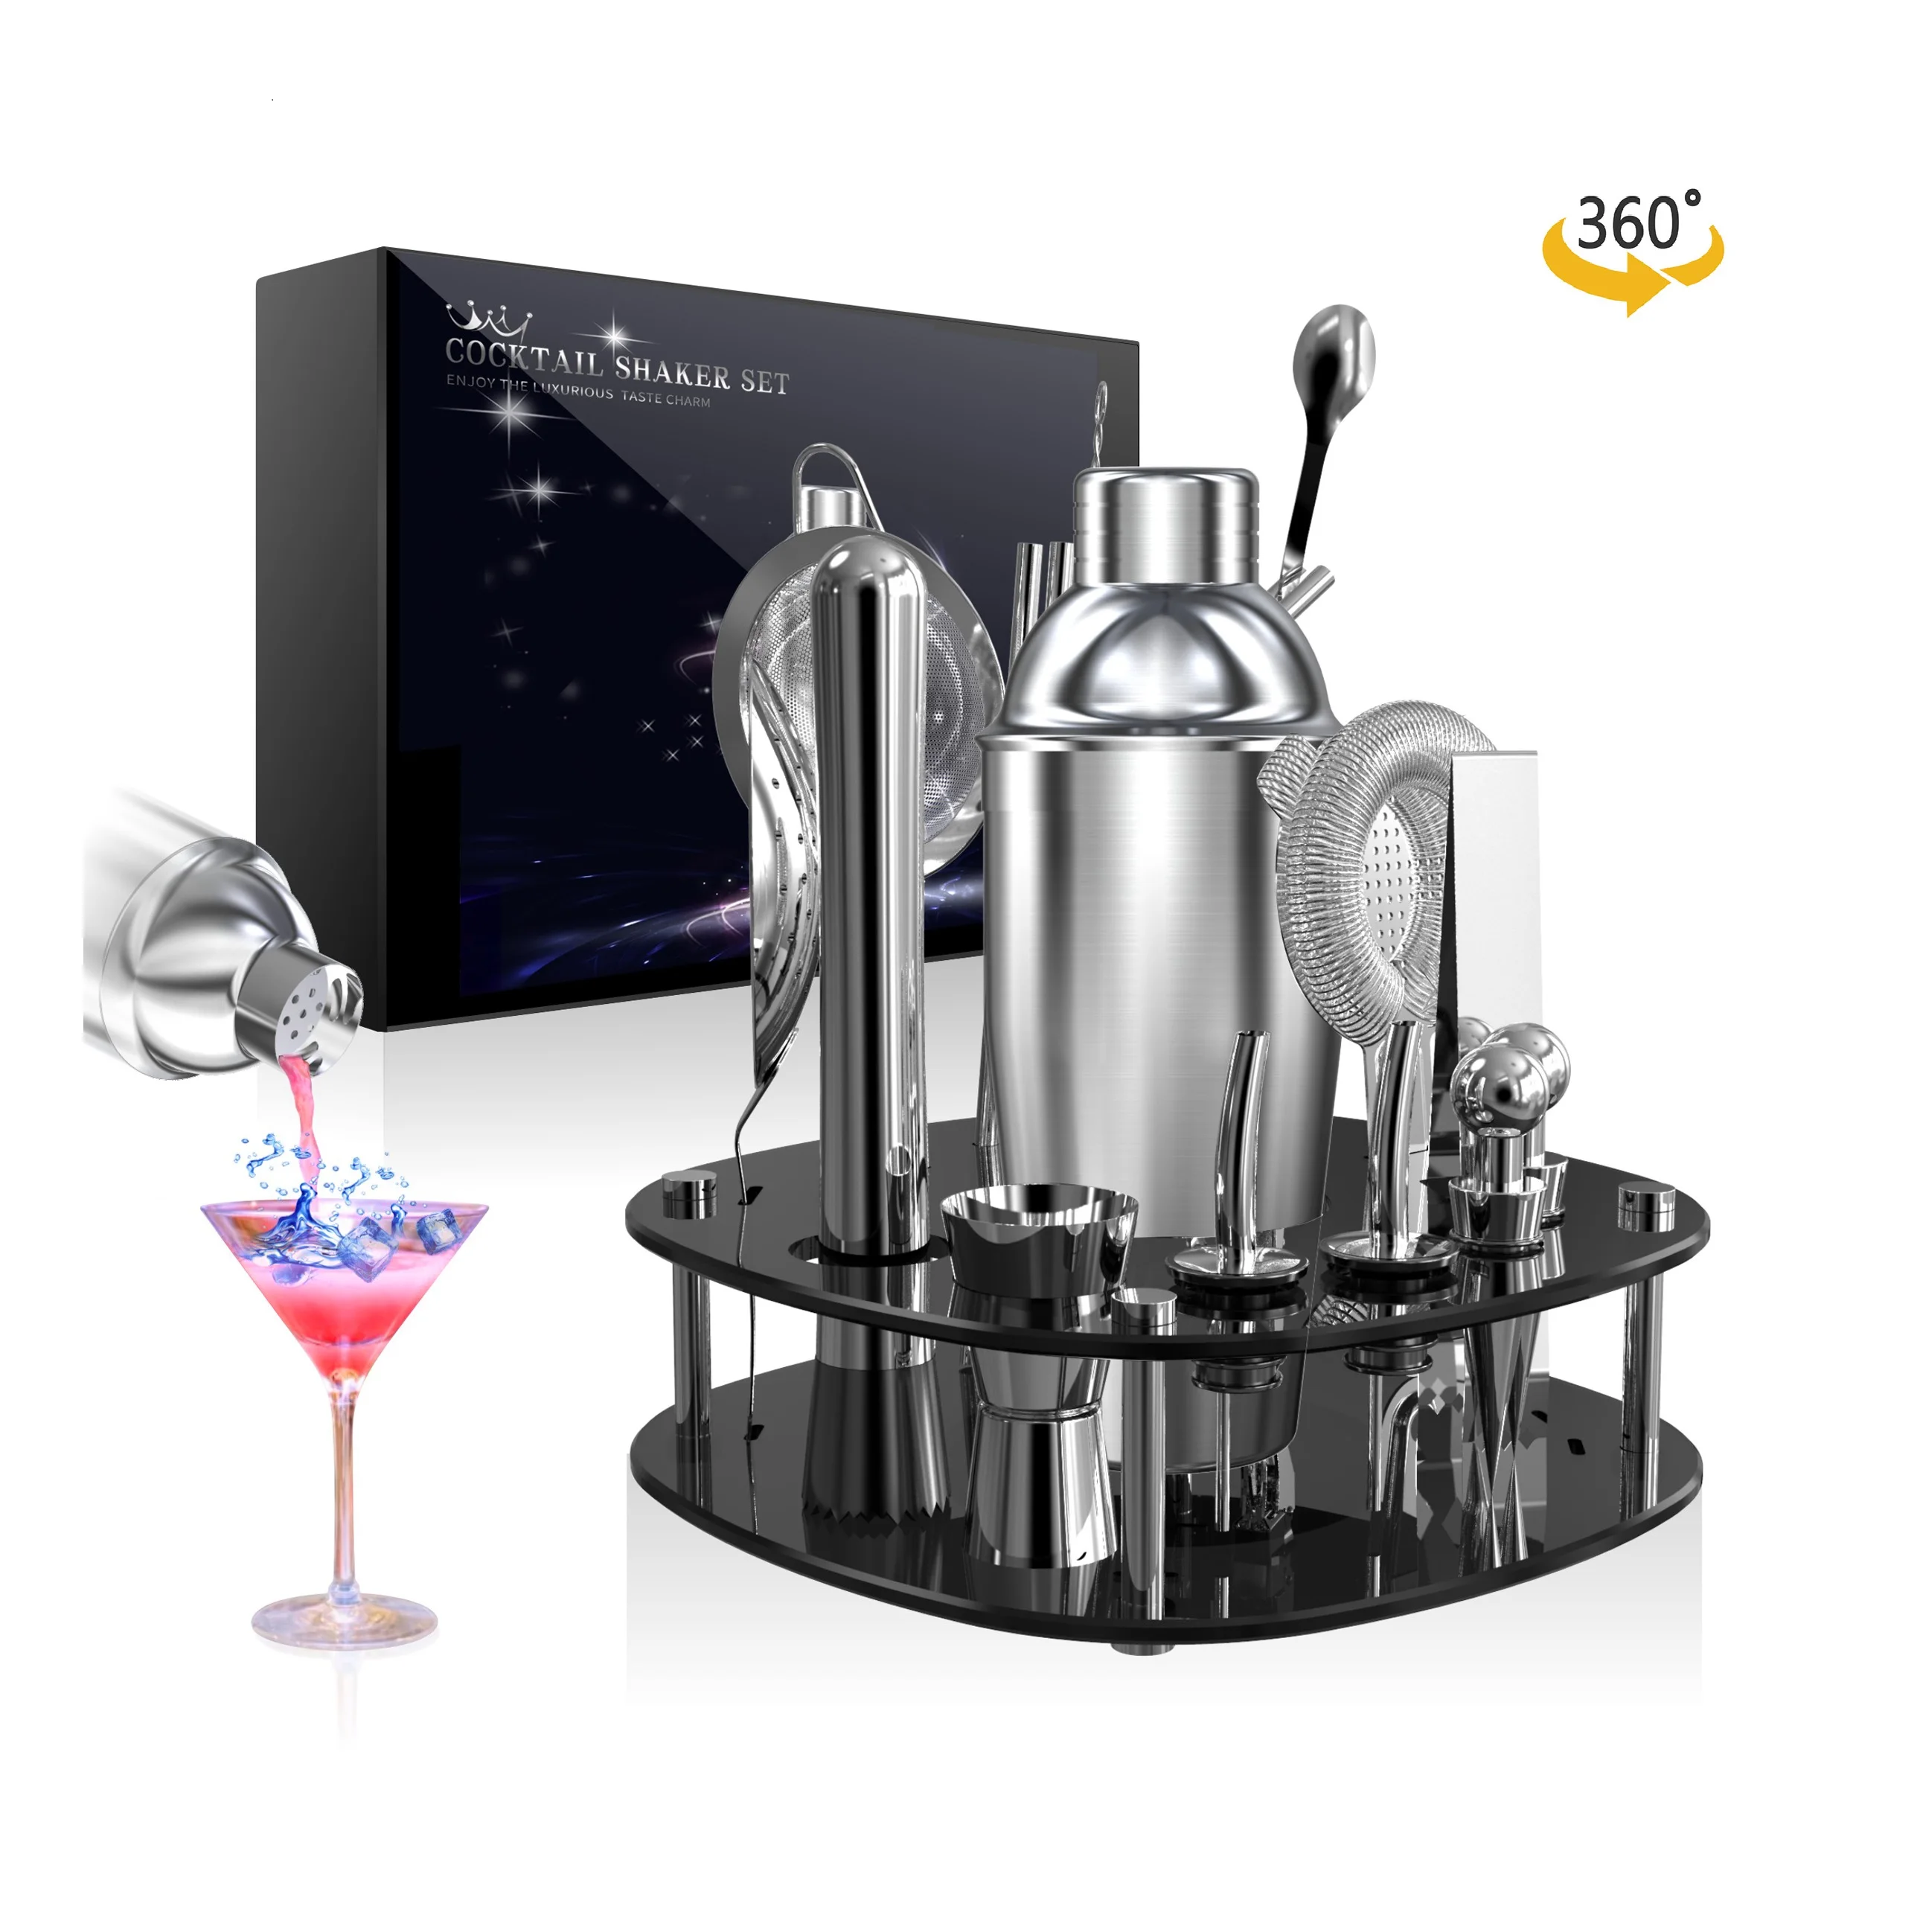 

20PCS Cocktail Shaker Set Bartender Kit with 360 Rotating Stand, Professional 25oz Stainless Steel Shaker Home Bar Tools, Silver